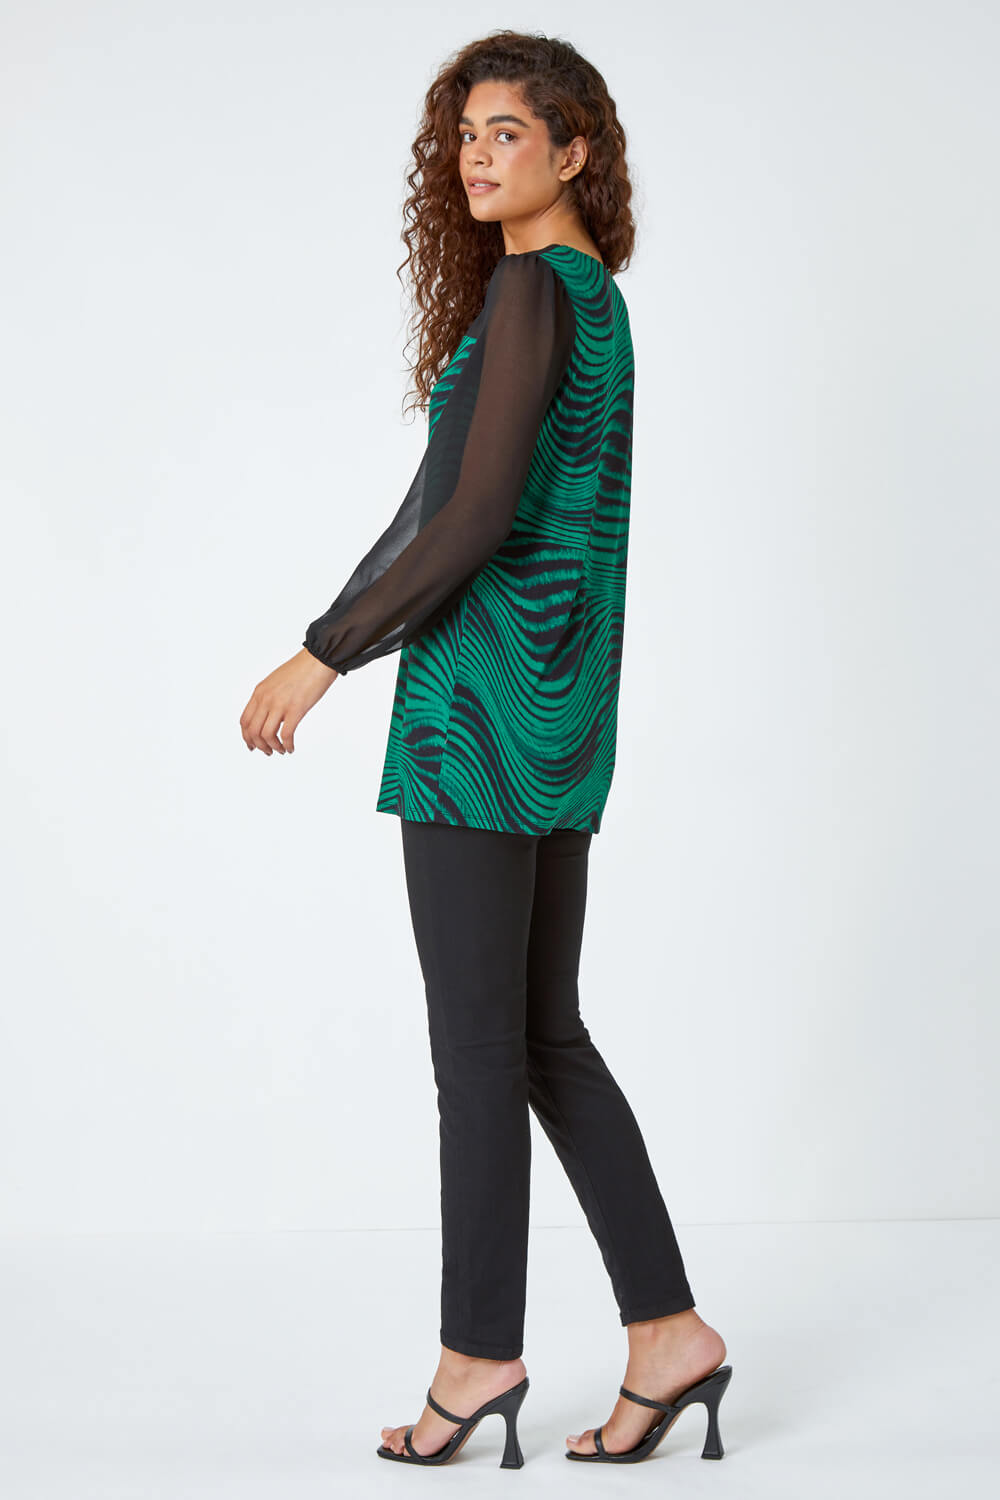 Green Abstract Print Chiffon Sleeve Stretch Top, Image 3 of 5